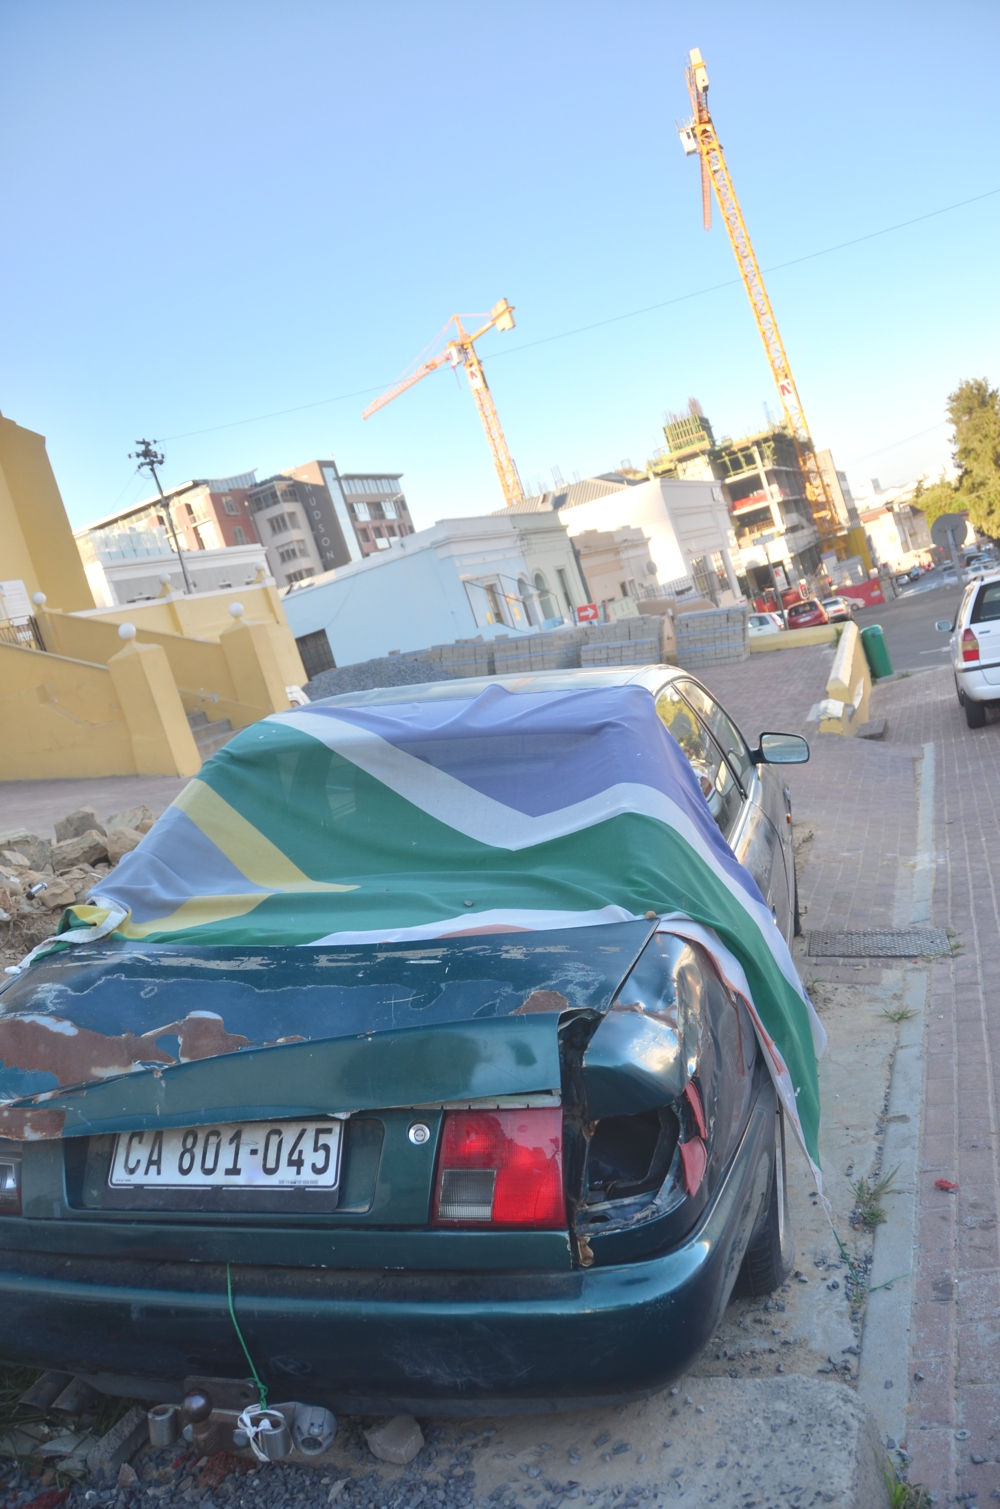 This picture seems to be a good metaphor for South Africa as a whole